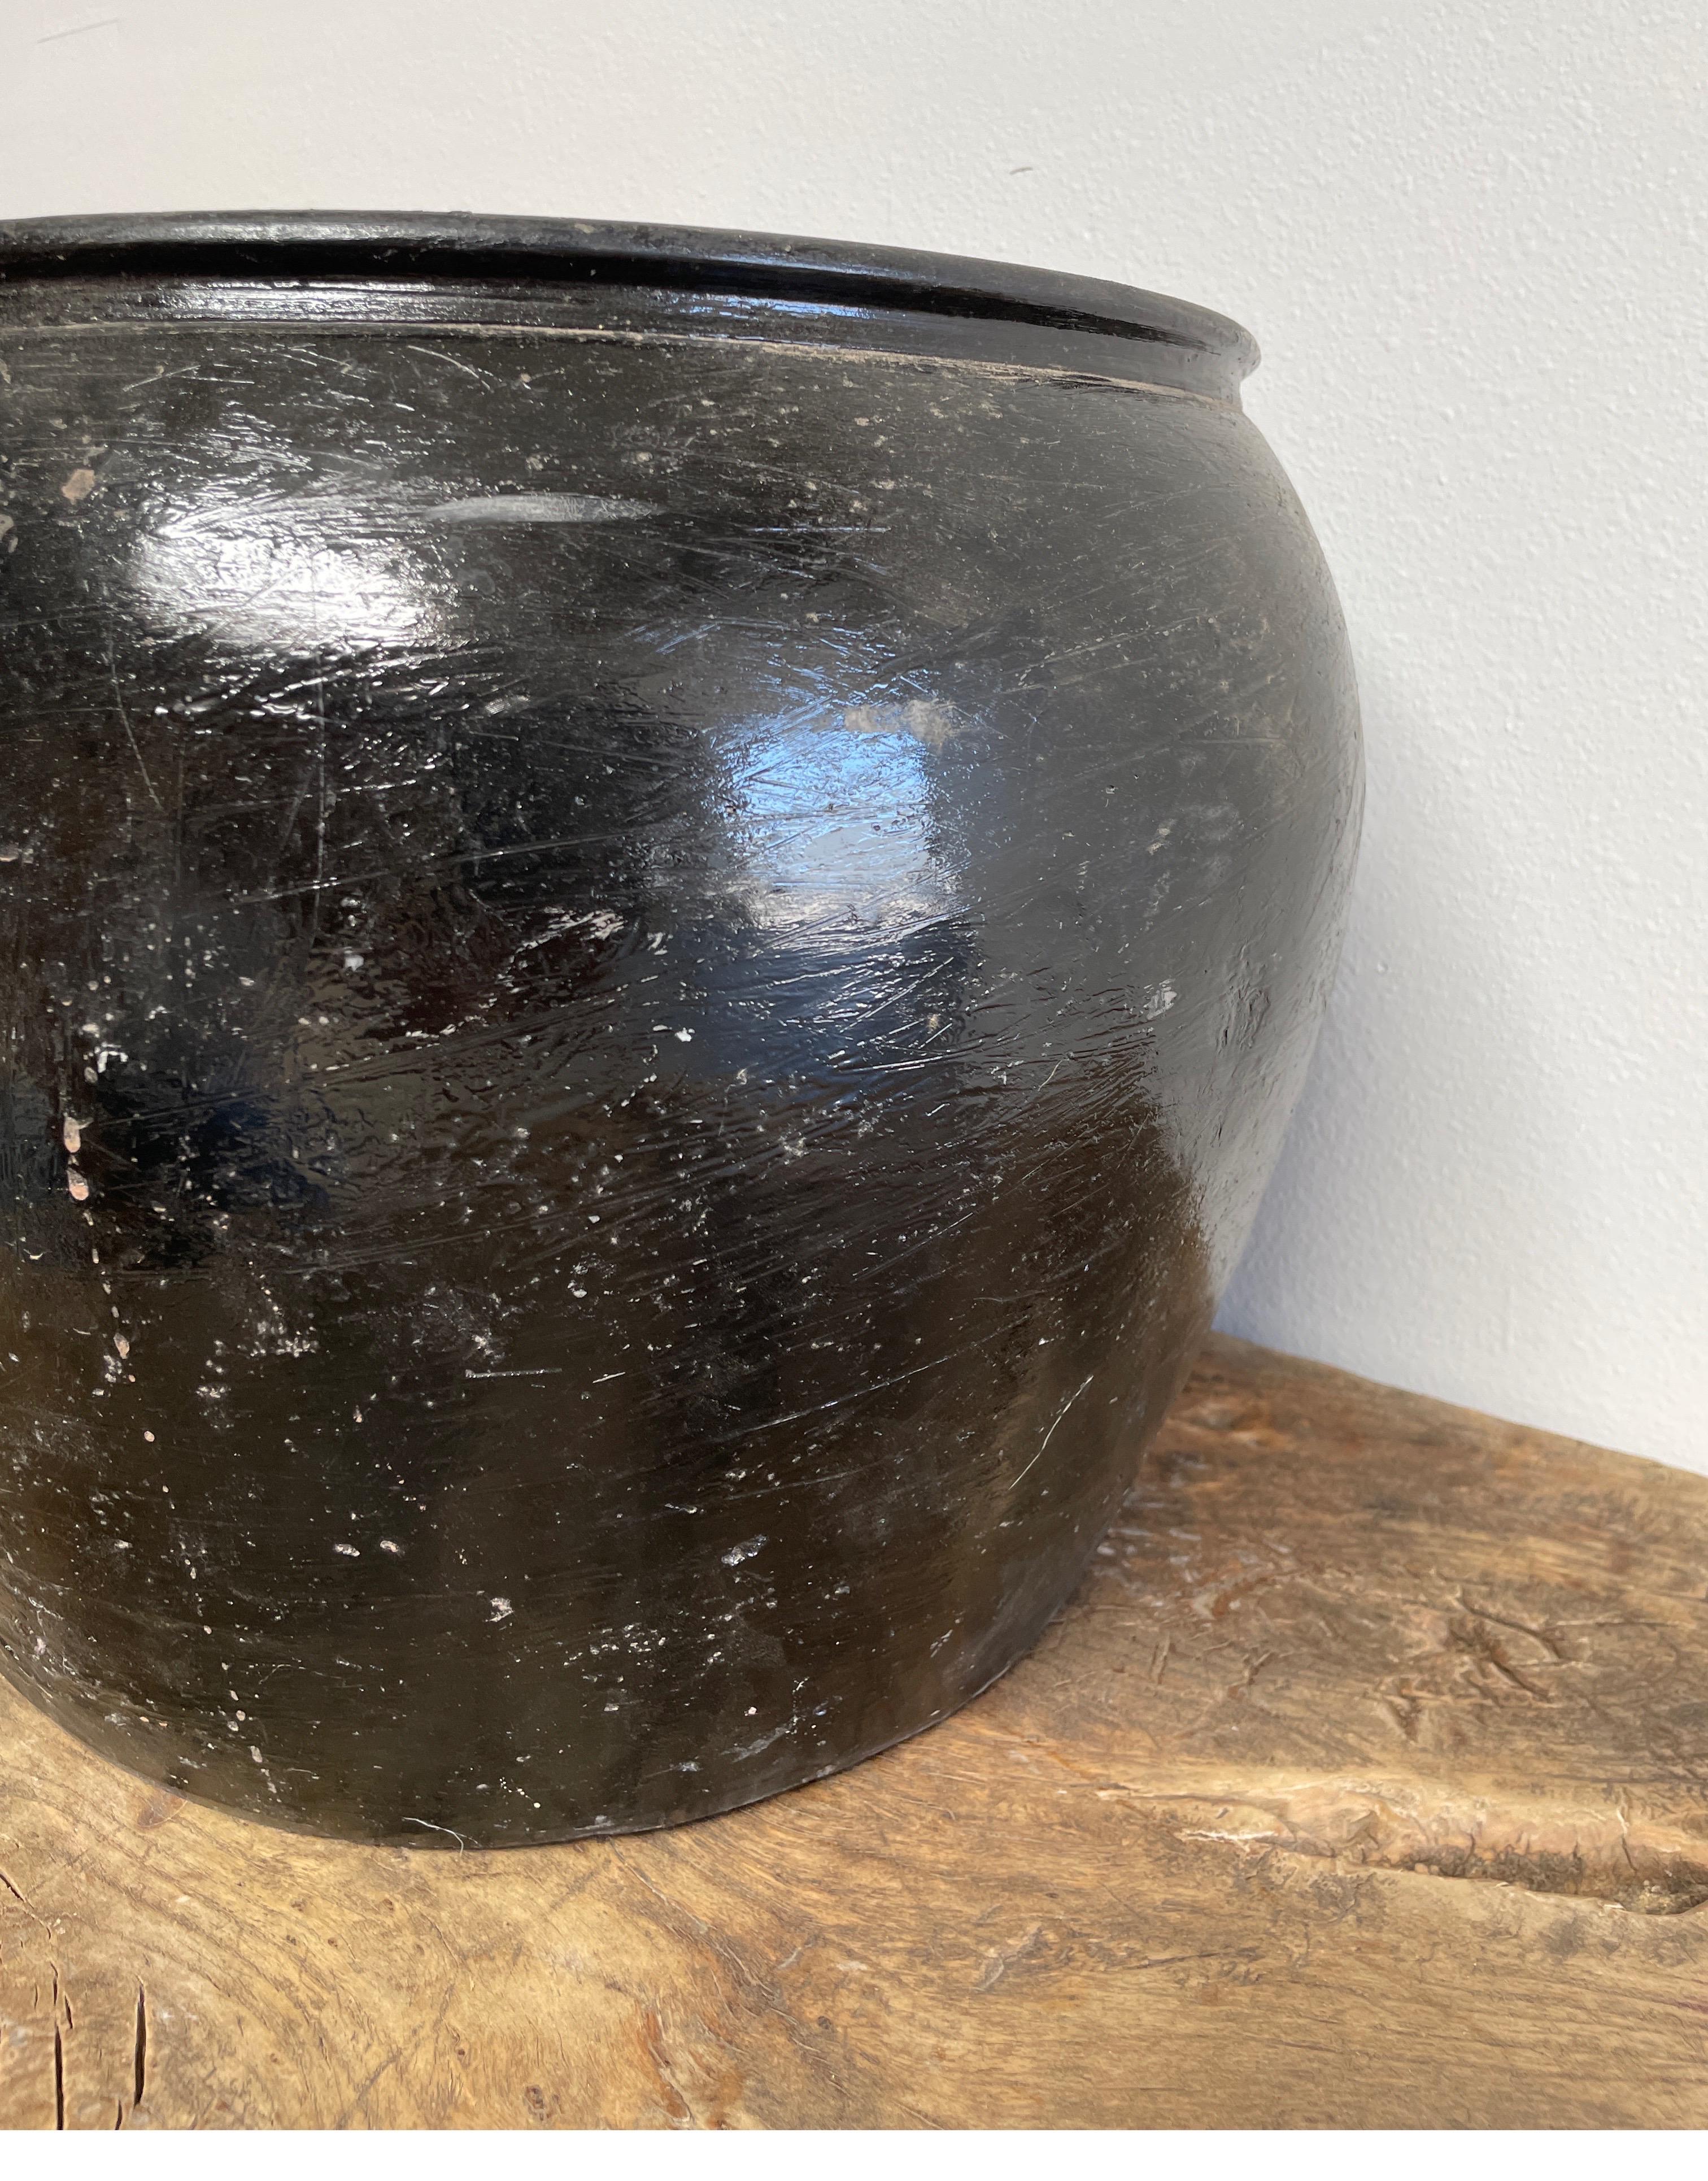 Vintage Pottery

Beautiful and rich in character, this vintage glazed oil pot adds just the right amount of texture + warmth where you need it. Stunning faded black/ brown unglazed finish with warm terra-cotta accents.
Some have a more faded